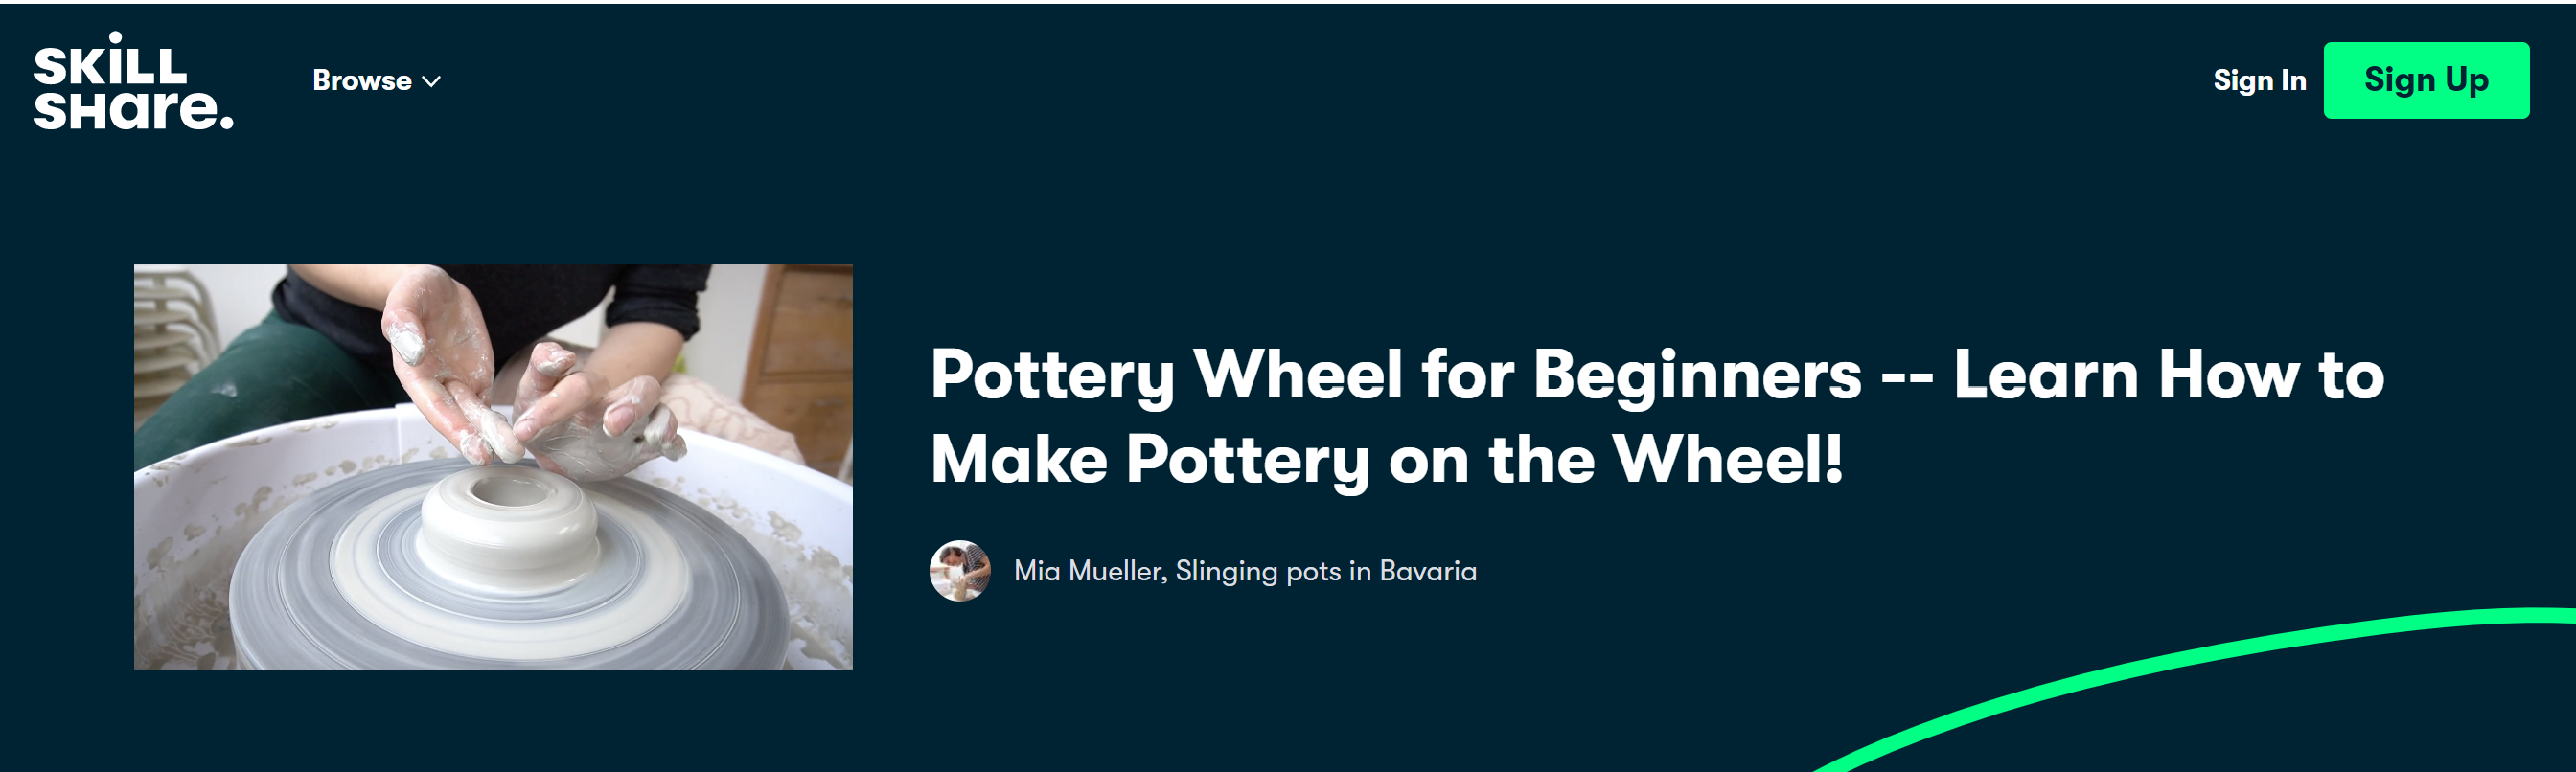 Pottery Wheel for Beginners - Learn How to Make Pottery on the Wheel!